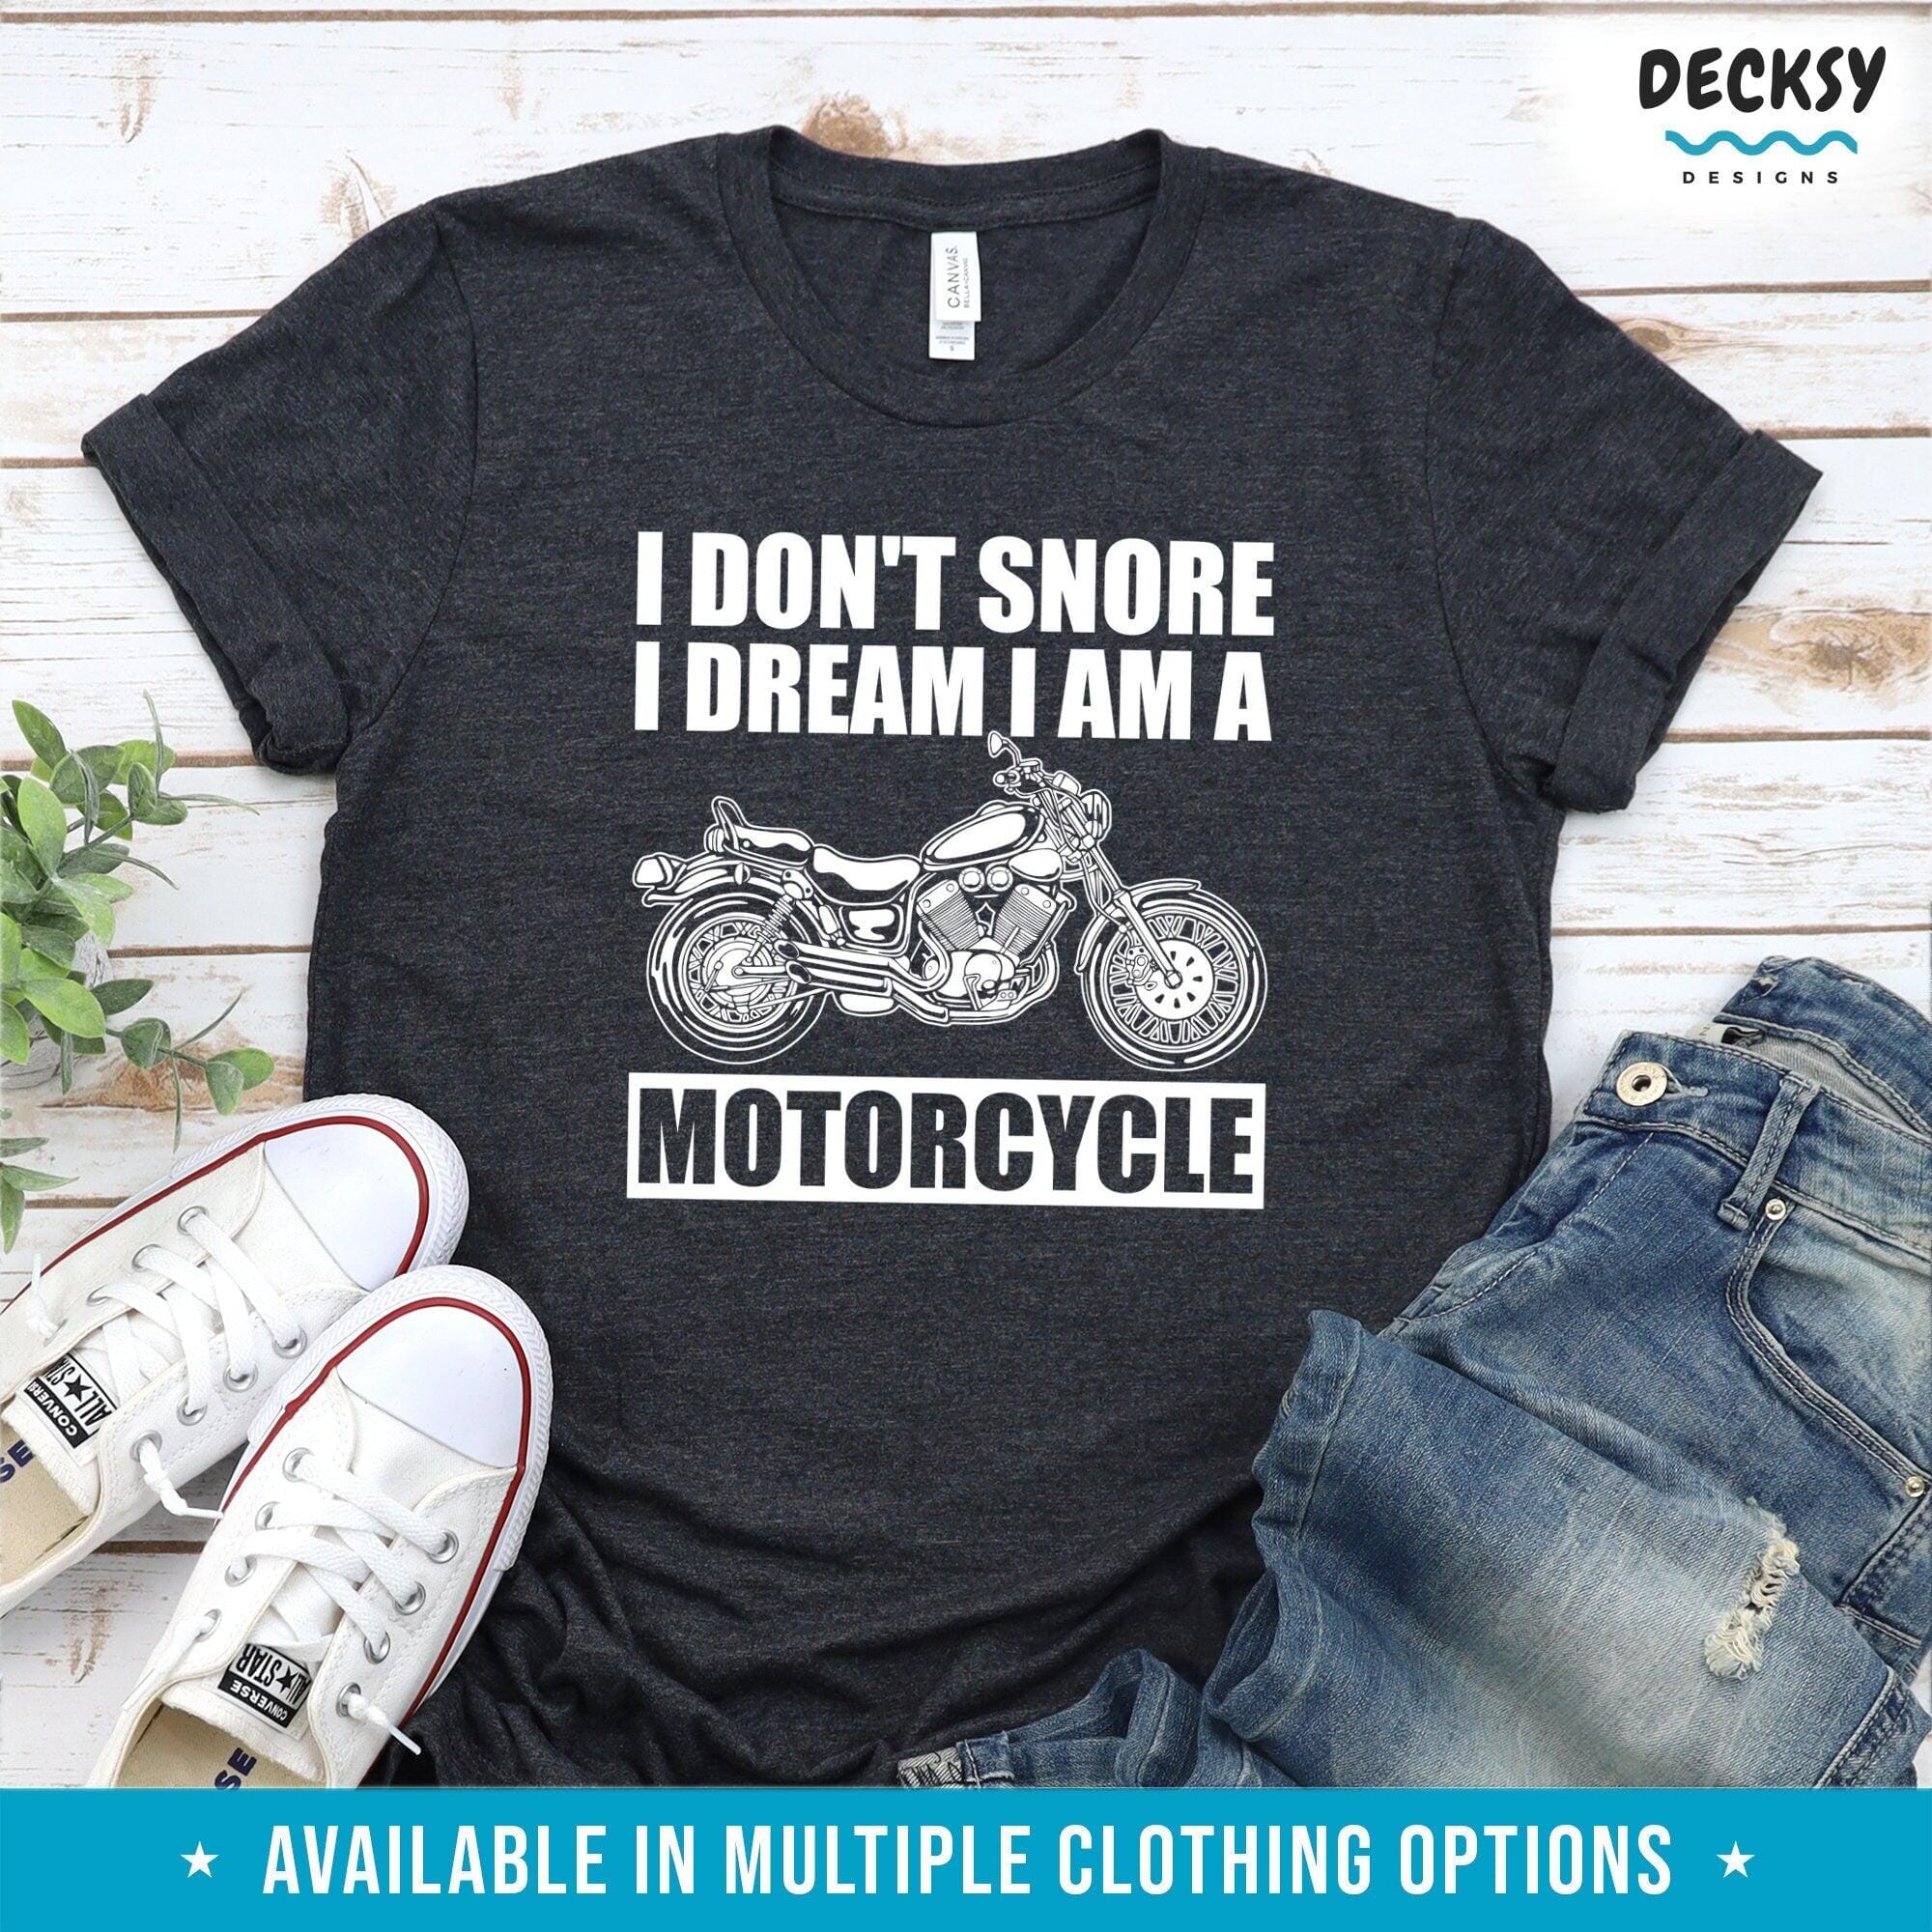 Motorcycle Tshirt, Biker Gift-Clothing:Gender-Neutral Adult Clothing:Tops & Tees:T-shirts:Graphic Tees-DecksyDesigns